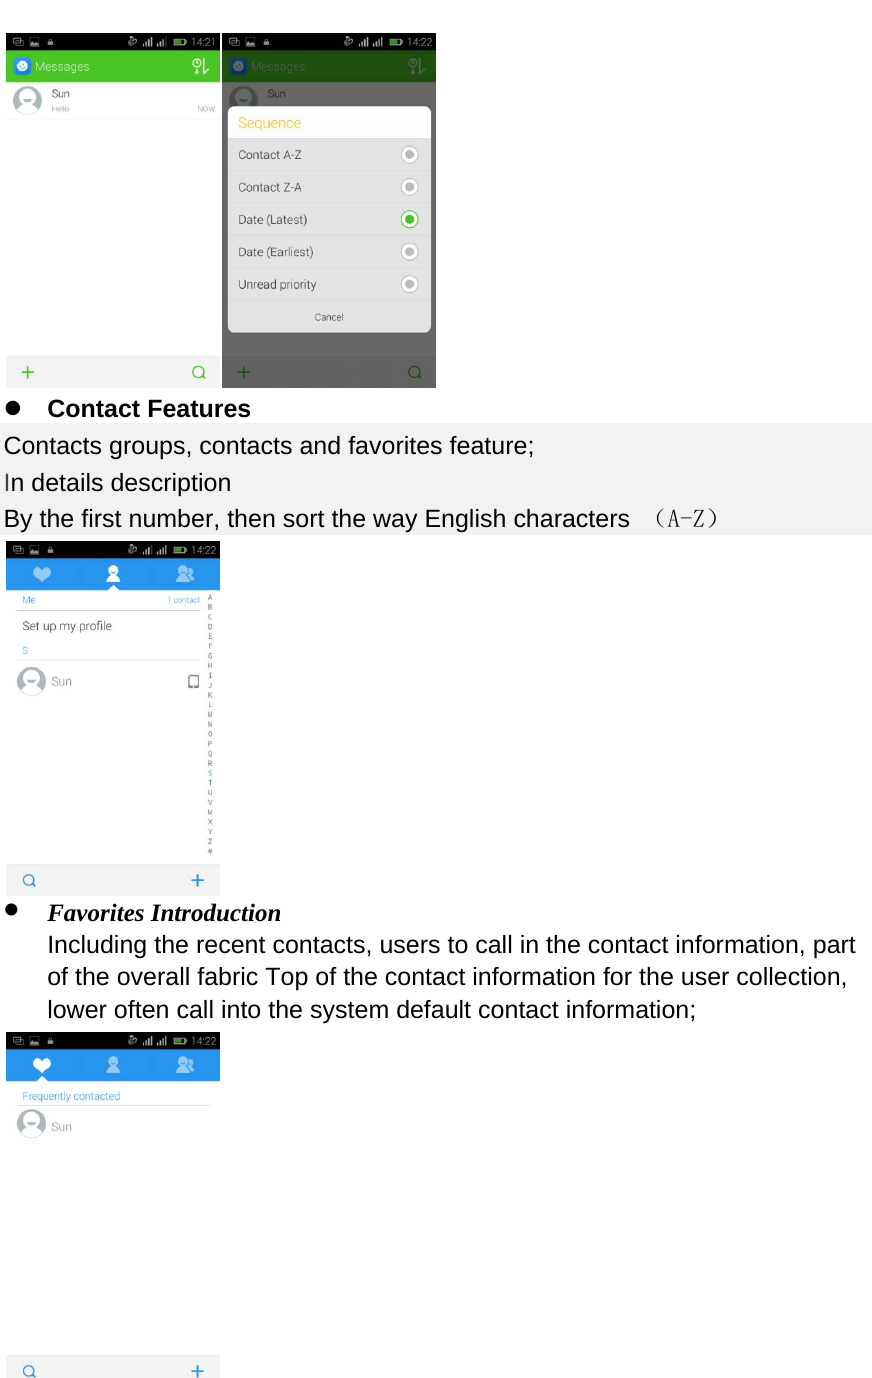    Contact Features Contacts groups, contacts and favorites feature; In details description By the first number, then sort the way English characters  （A-Z）   Favorites Introduction Including the recent contacts, users to call in the contact information, part of the overall fabric Top of the contact information for the user collection, lower often call into the system default contact information;    